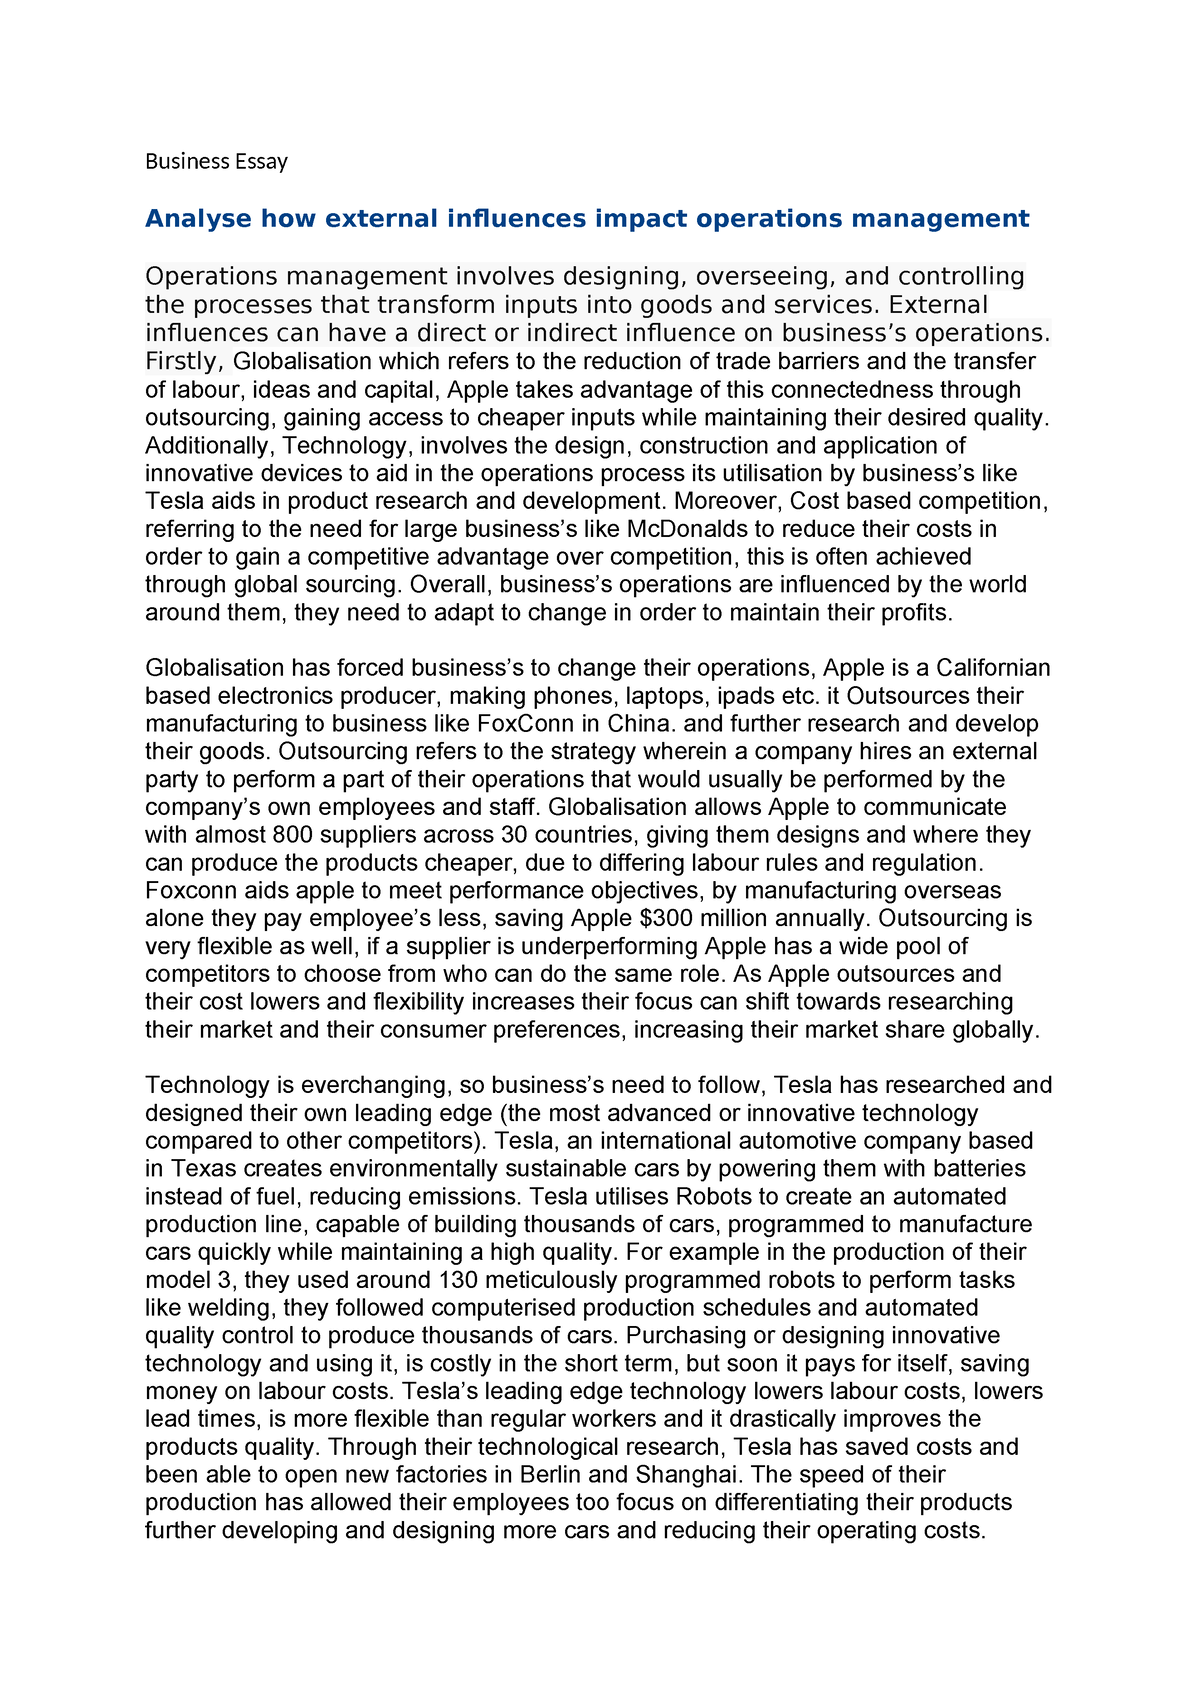 business operations essay example